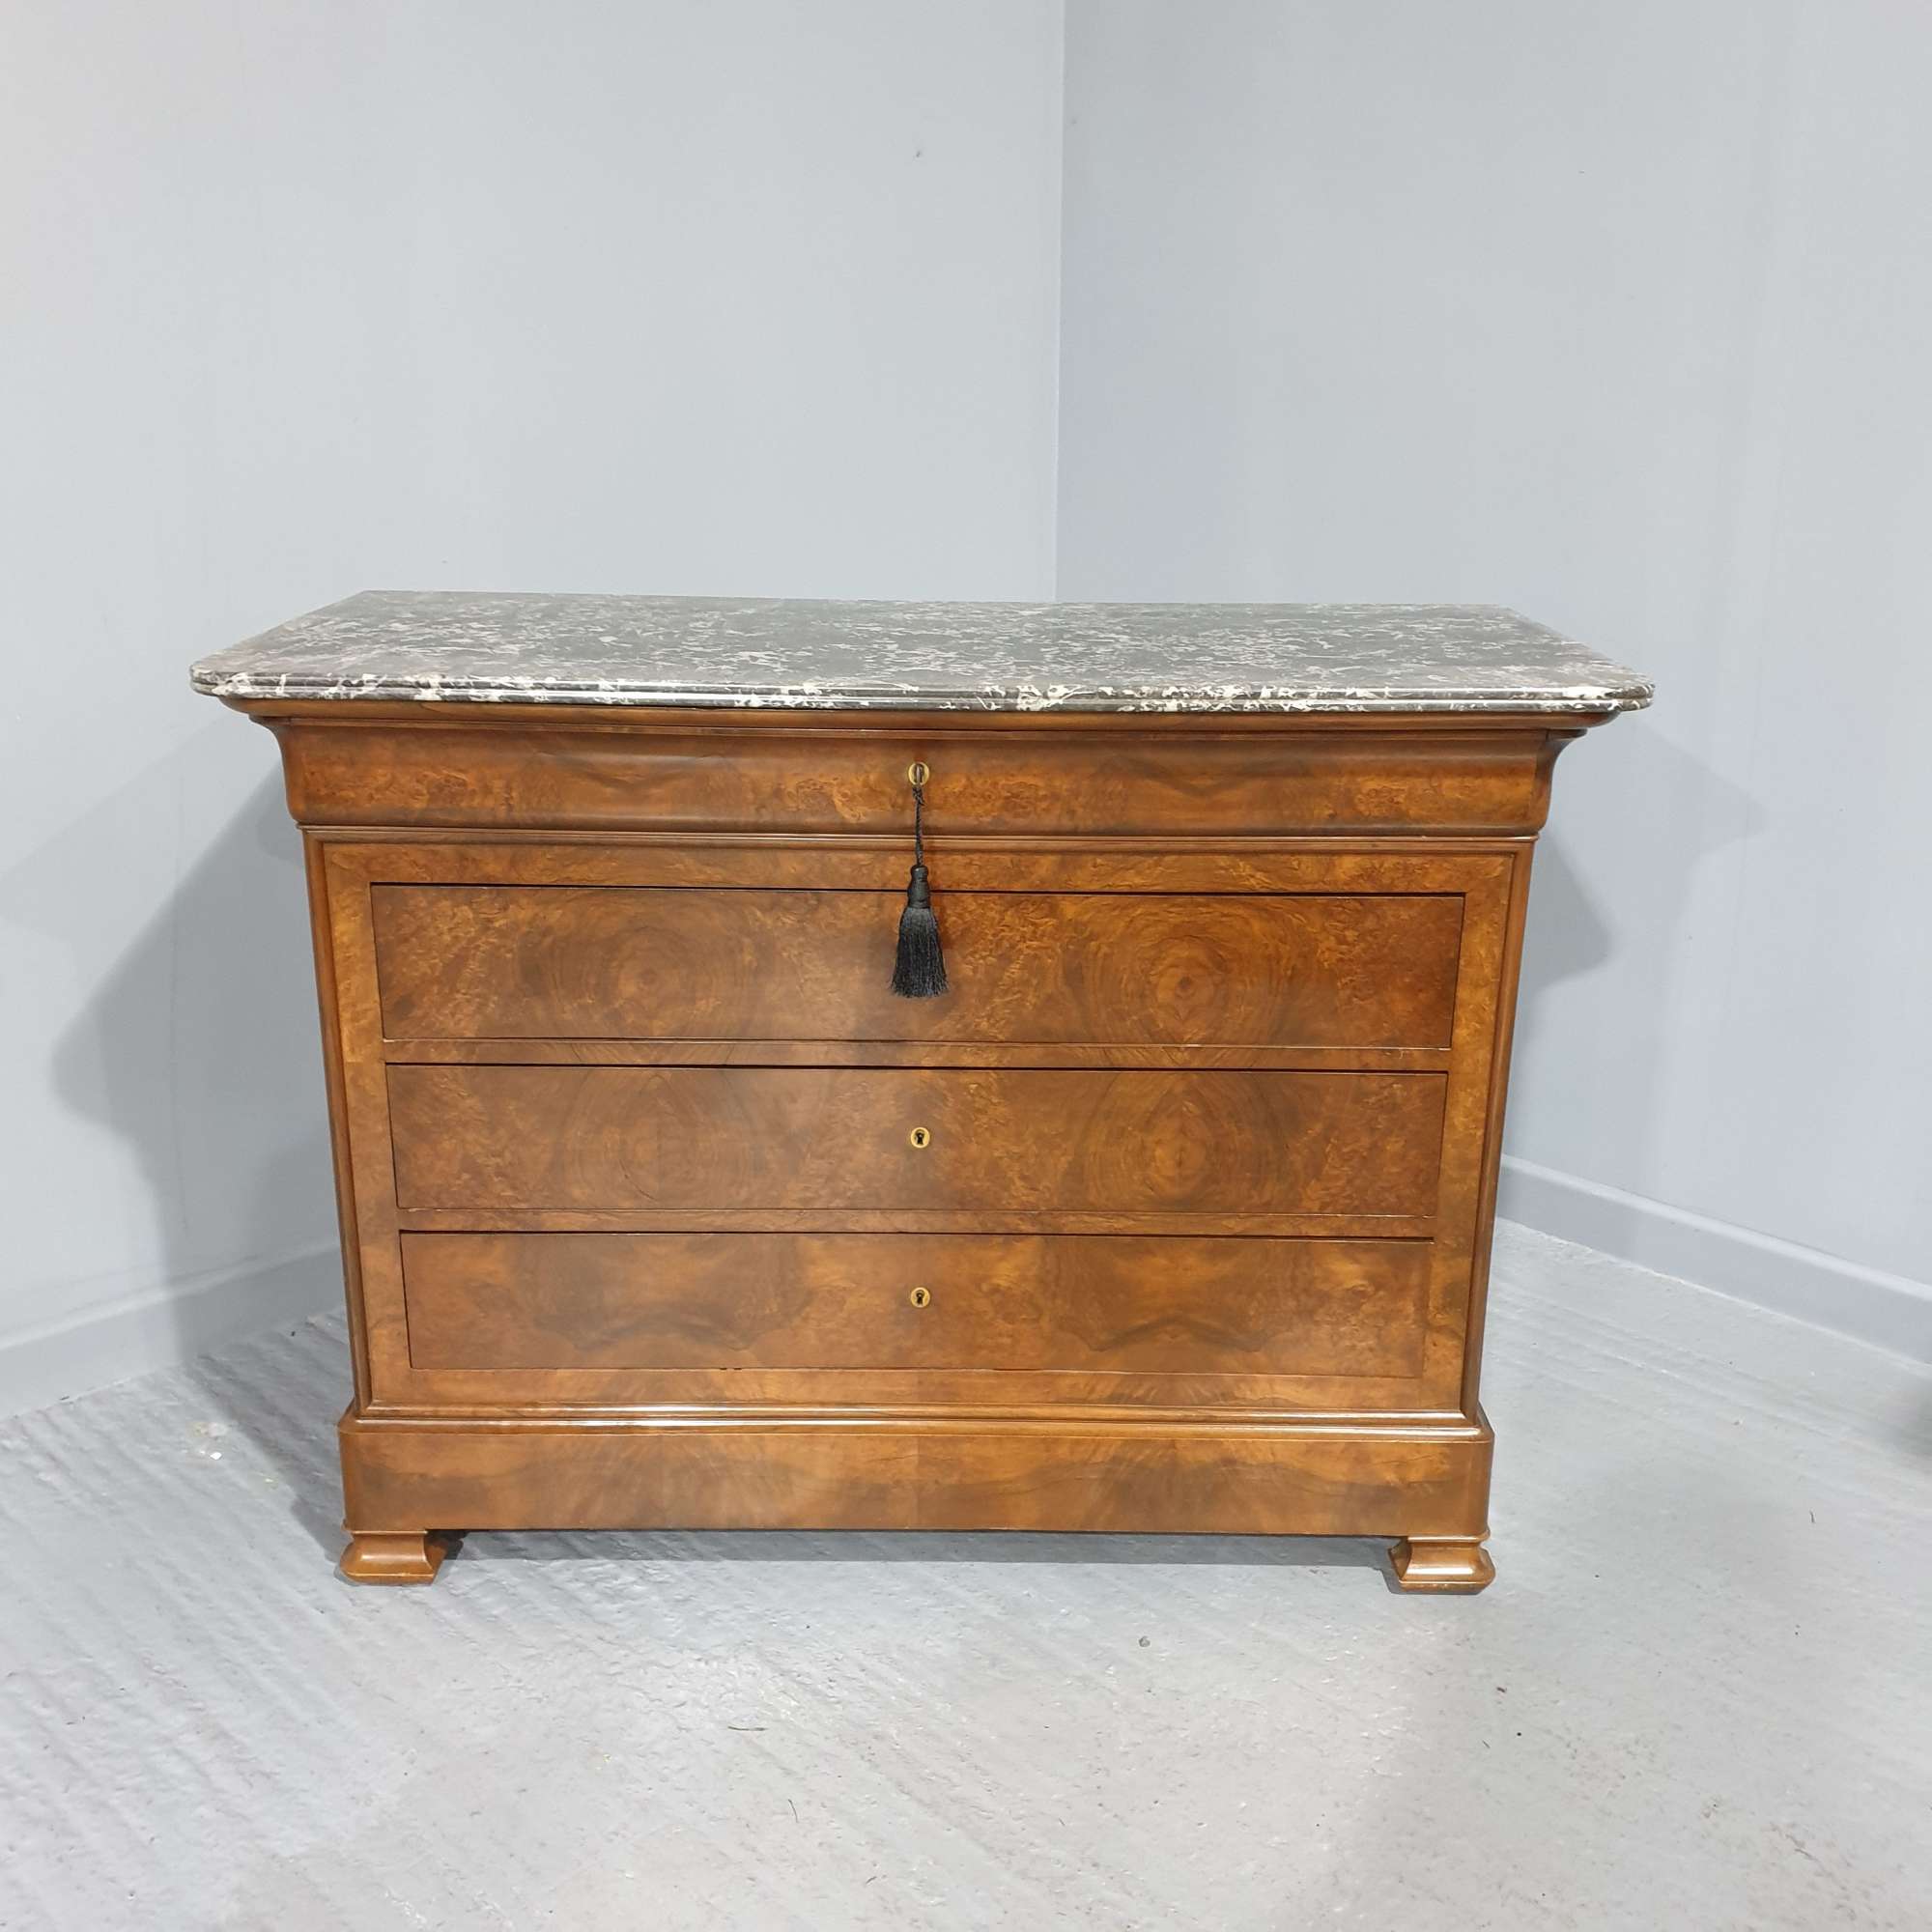 Lovely Burr Walnut Antique Commode Chest Of Drawers